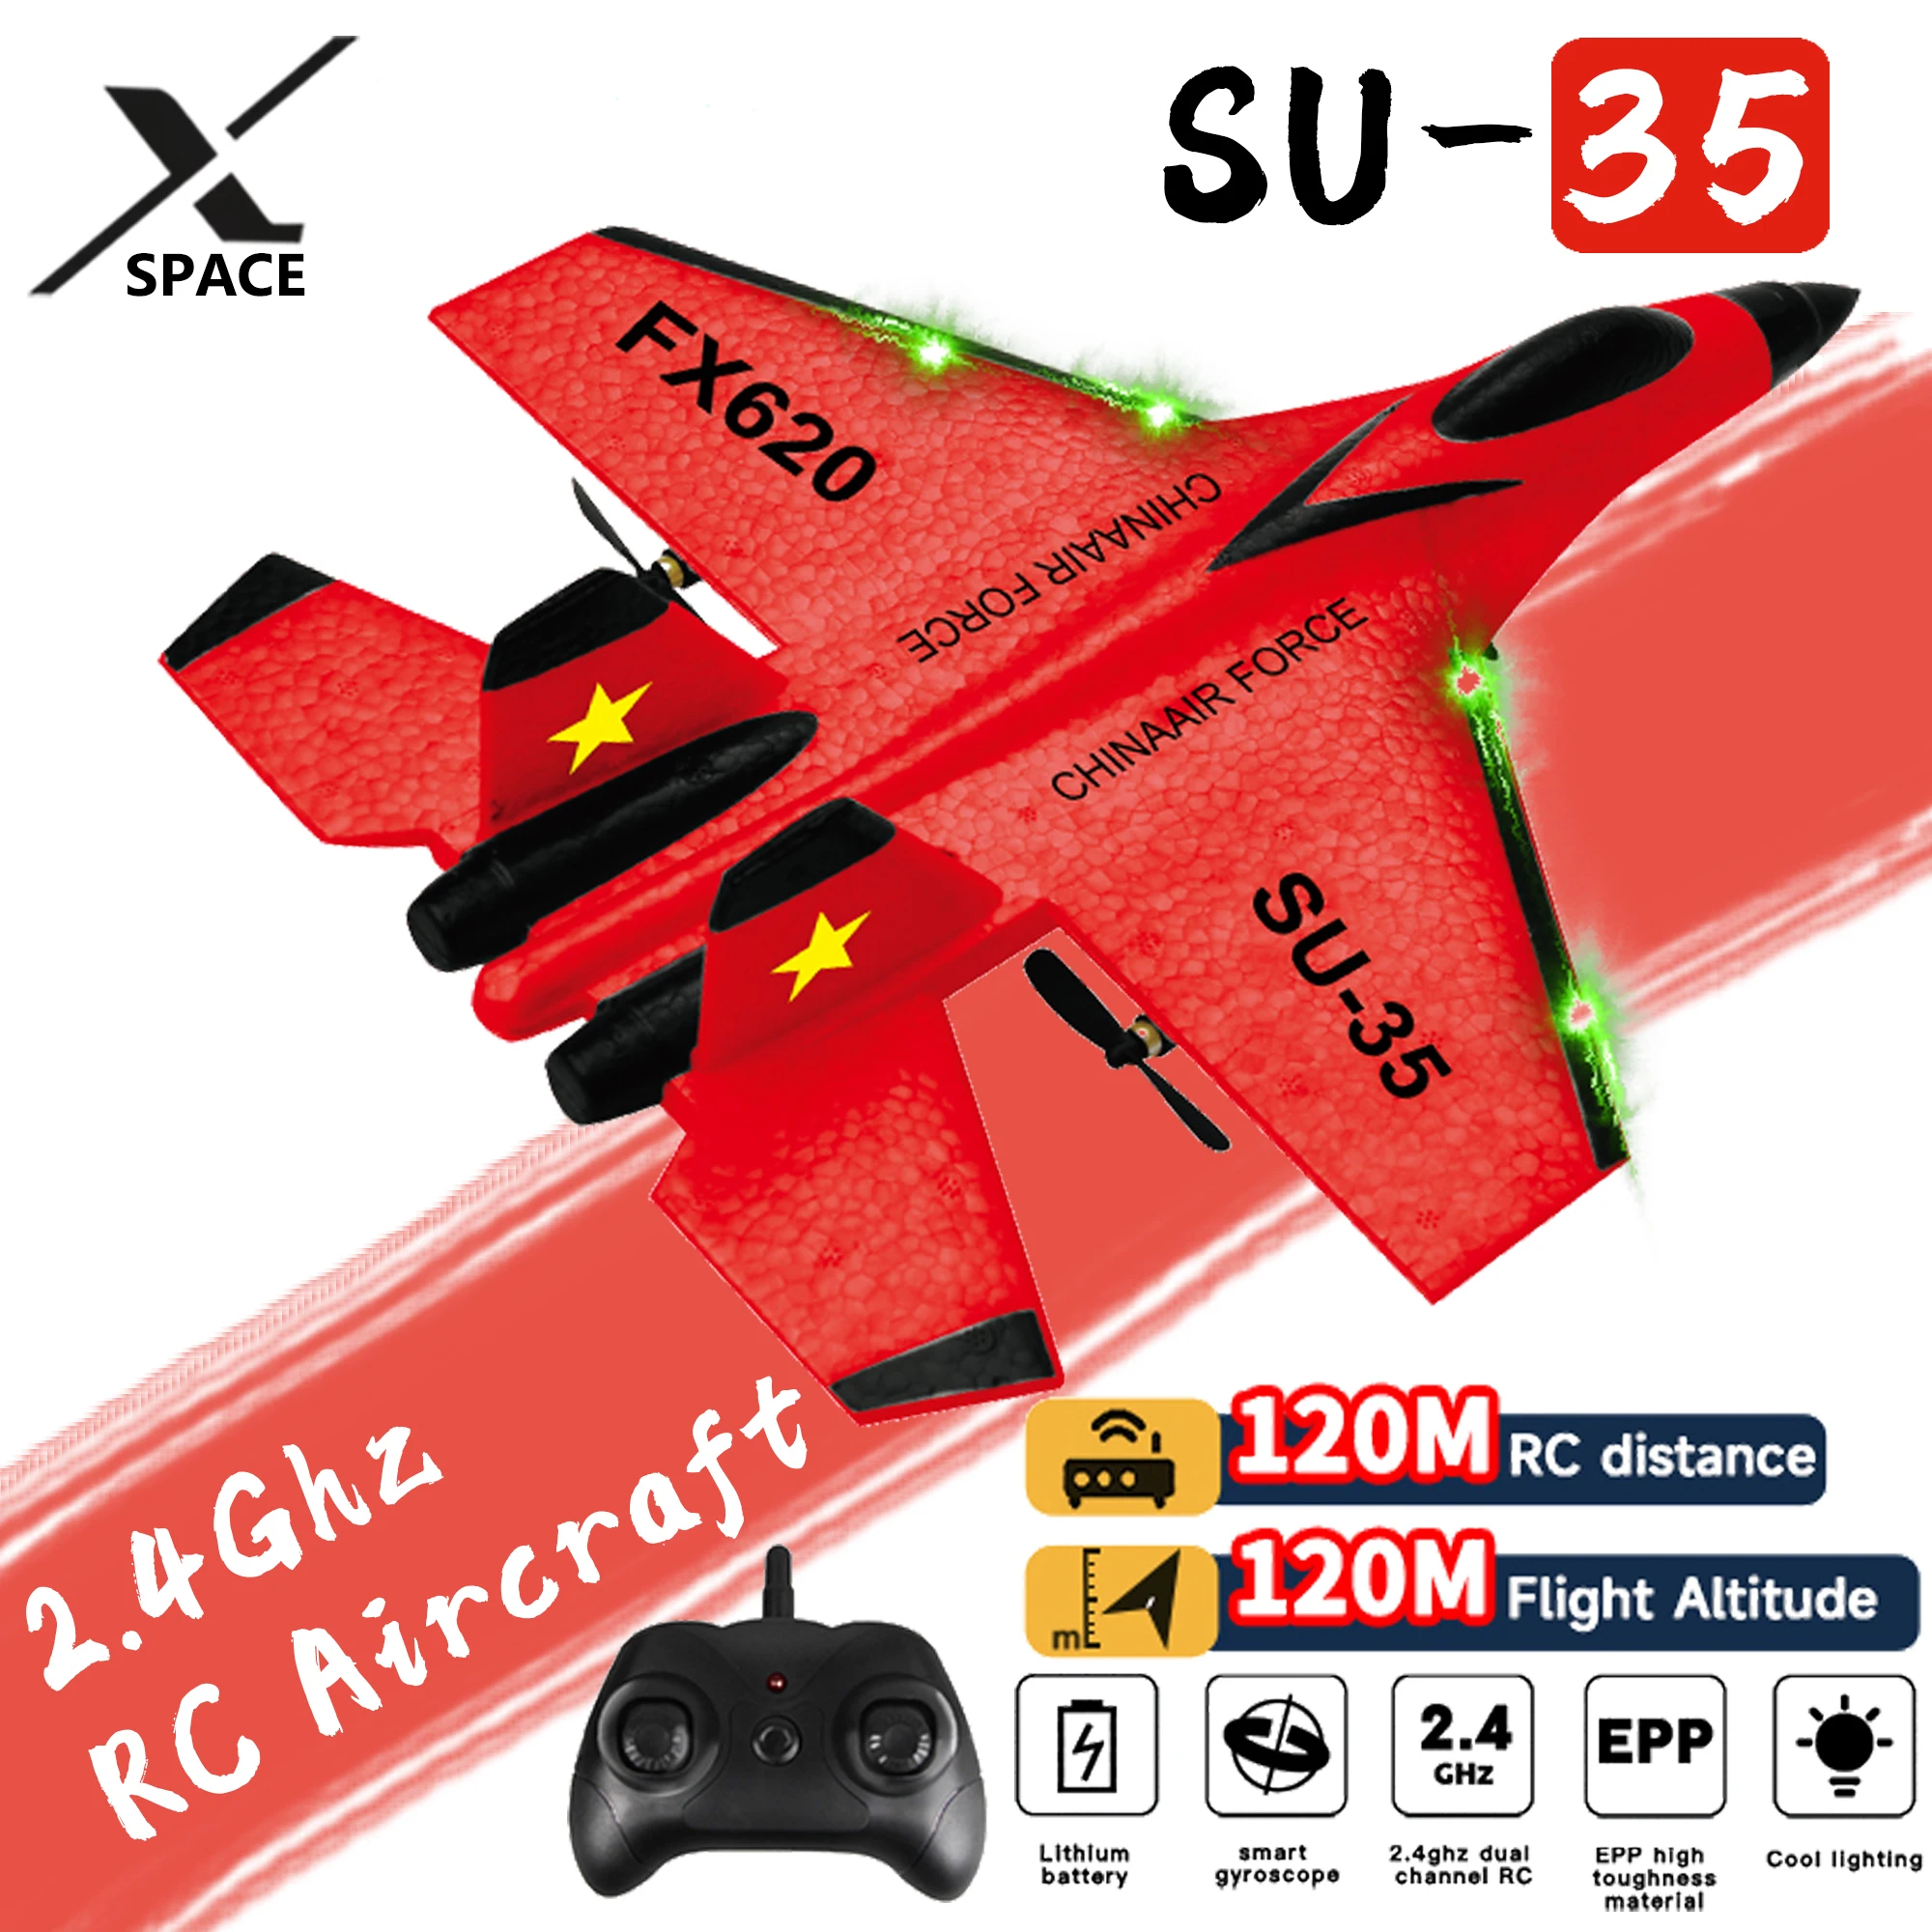 

RC Plane SU35 2.4G With LED Lights Aircraft Remote Control Flying Model Glider EPP Foam Toys Airplane For Children Gifts